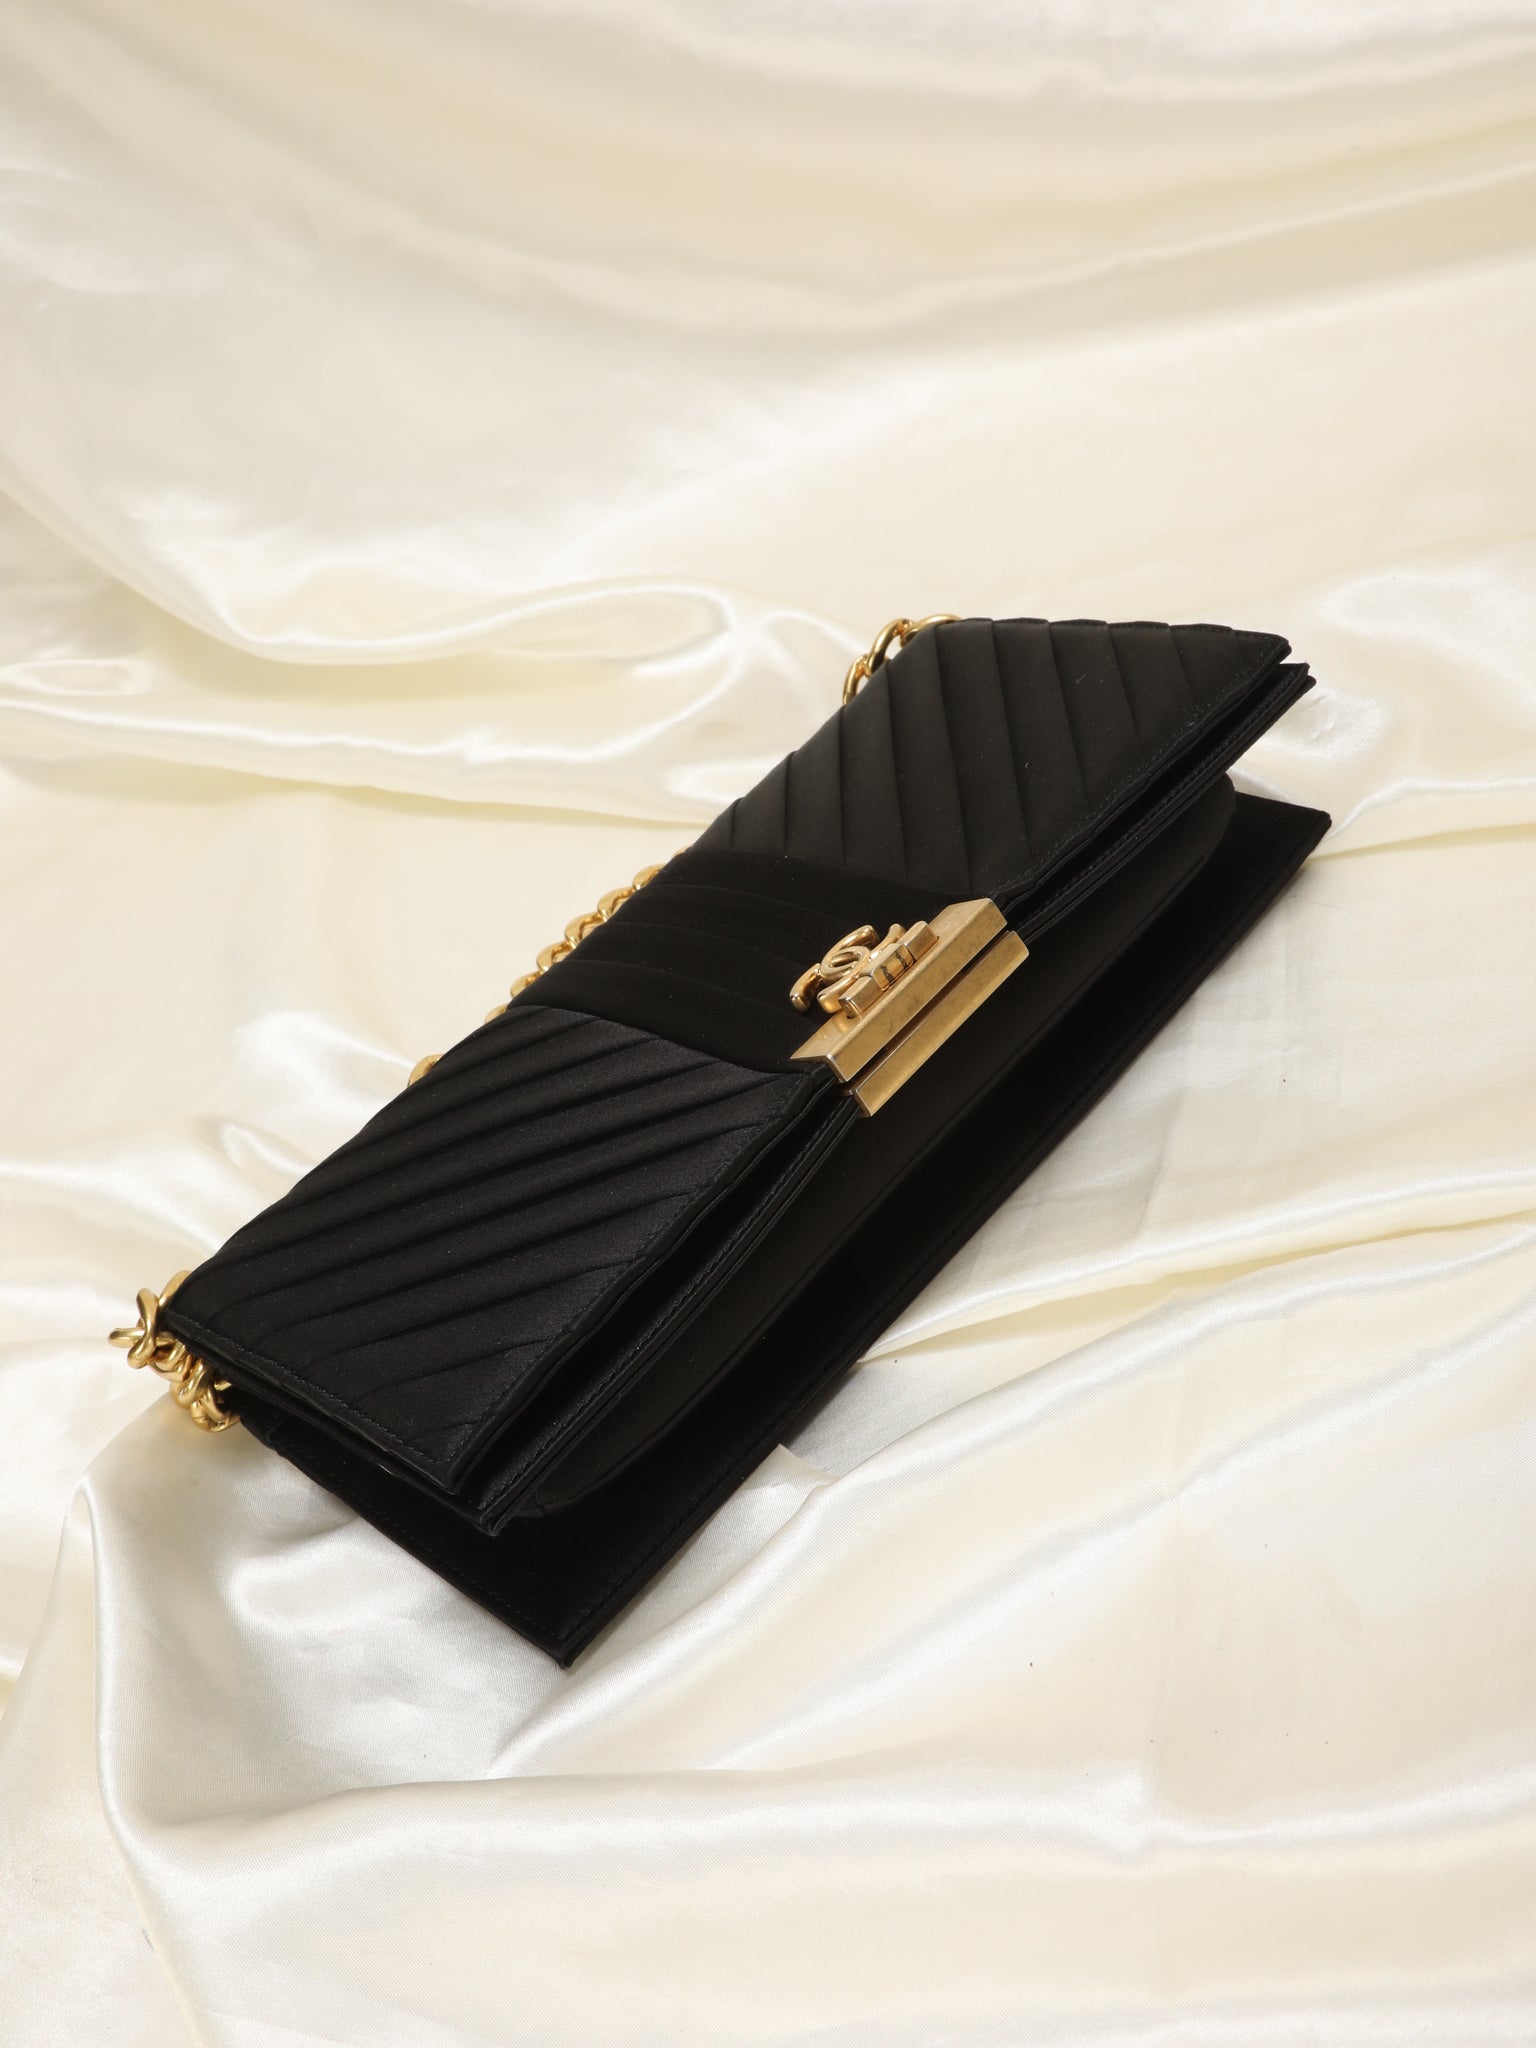 Extremely Rare Chanel 2019 Satin Clutch Bag